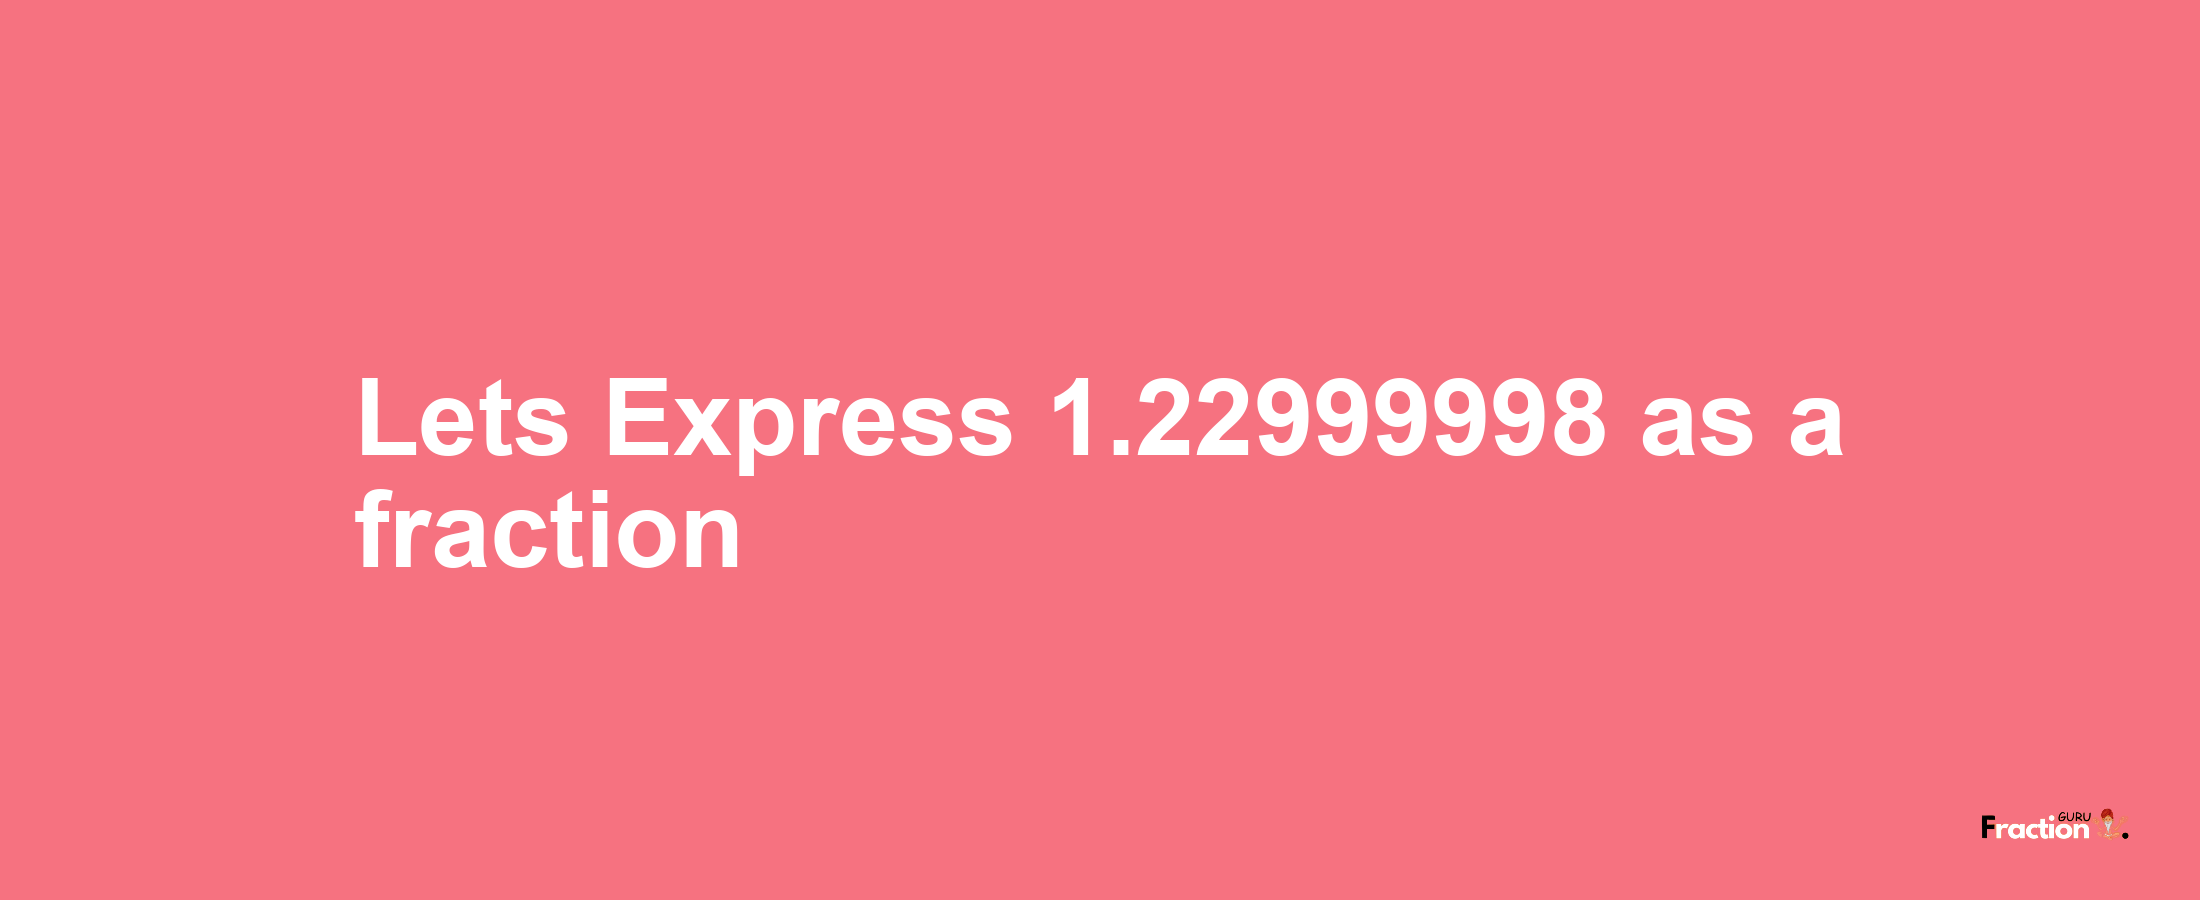 Lets Express 1.22999998 as afraction